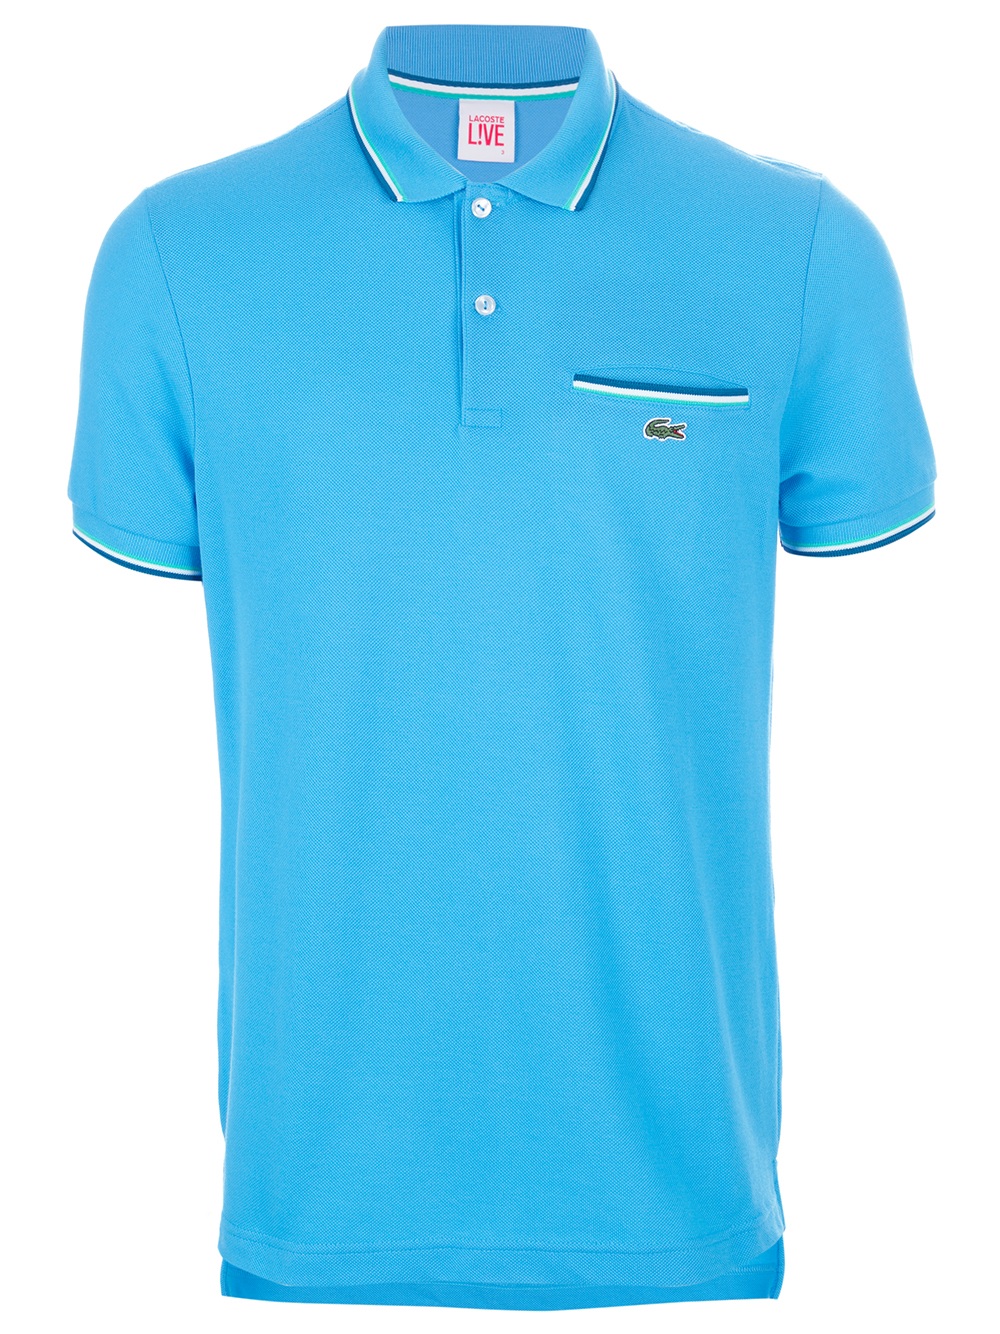 Lacoste L!ive Shirt with Pocket in Blue for Men